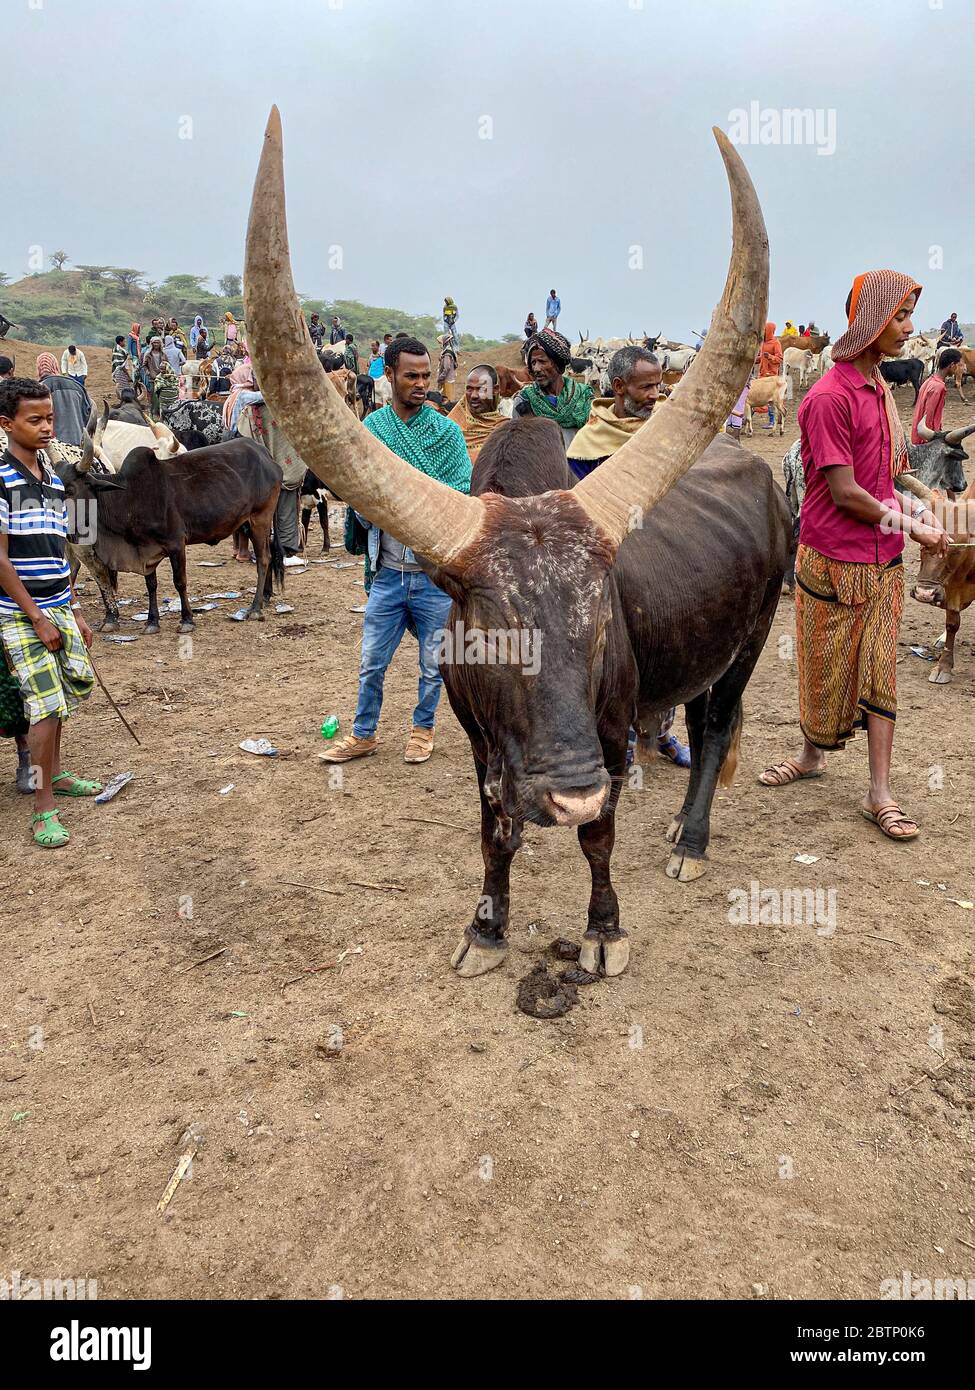 Bull with long horns in the cattle market of Bati, Amhara Region, Oromia, Ethiopia, Africa Stock Photo